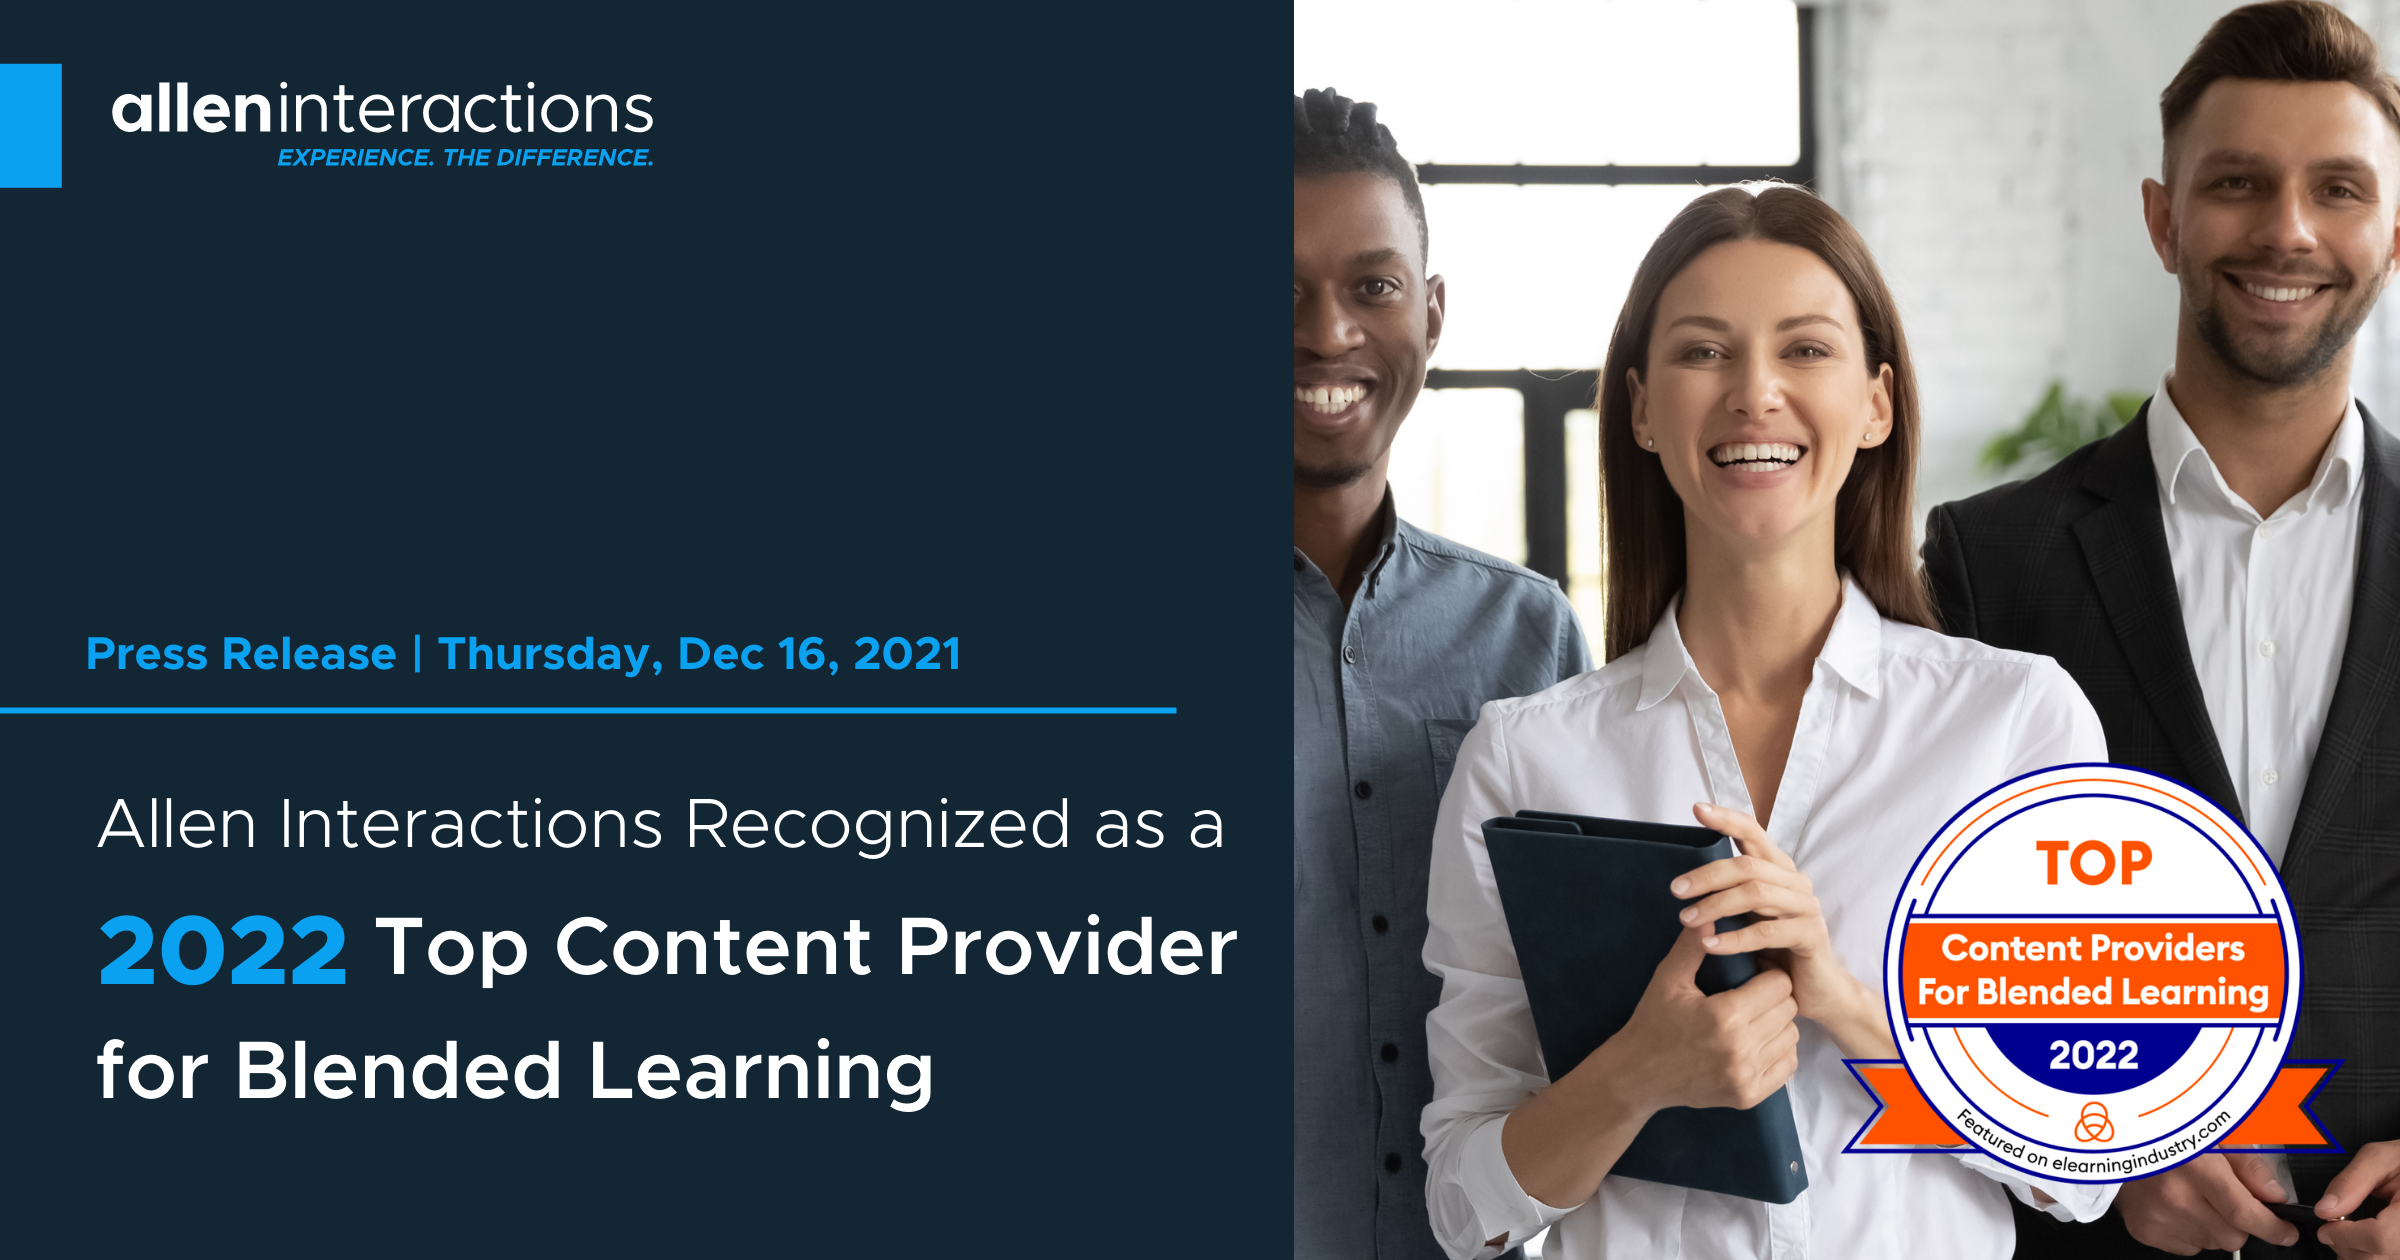 Allen Interactions Recognized by eLearning Industry as a 2022 Top Content Provider for Blended Learning